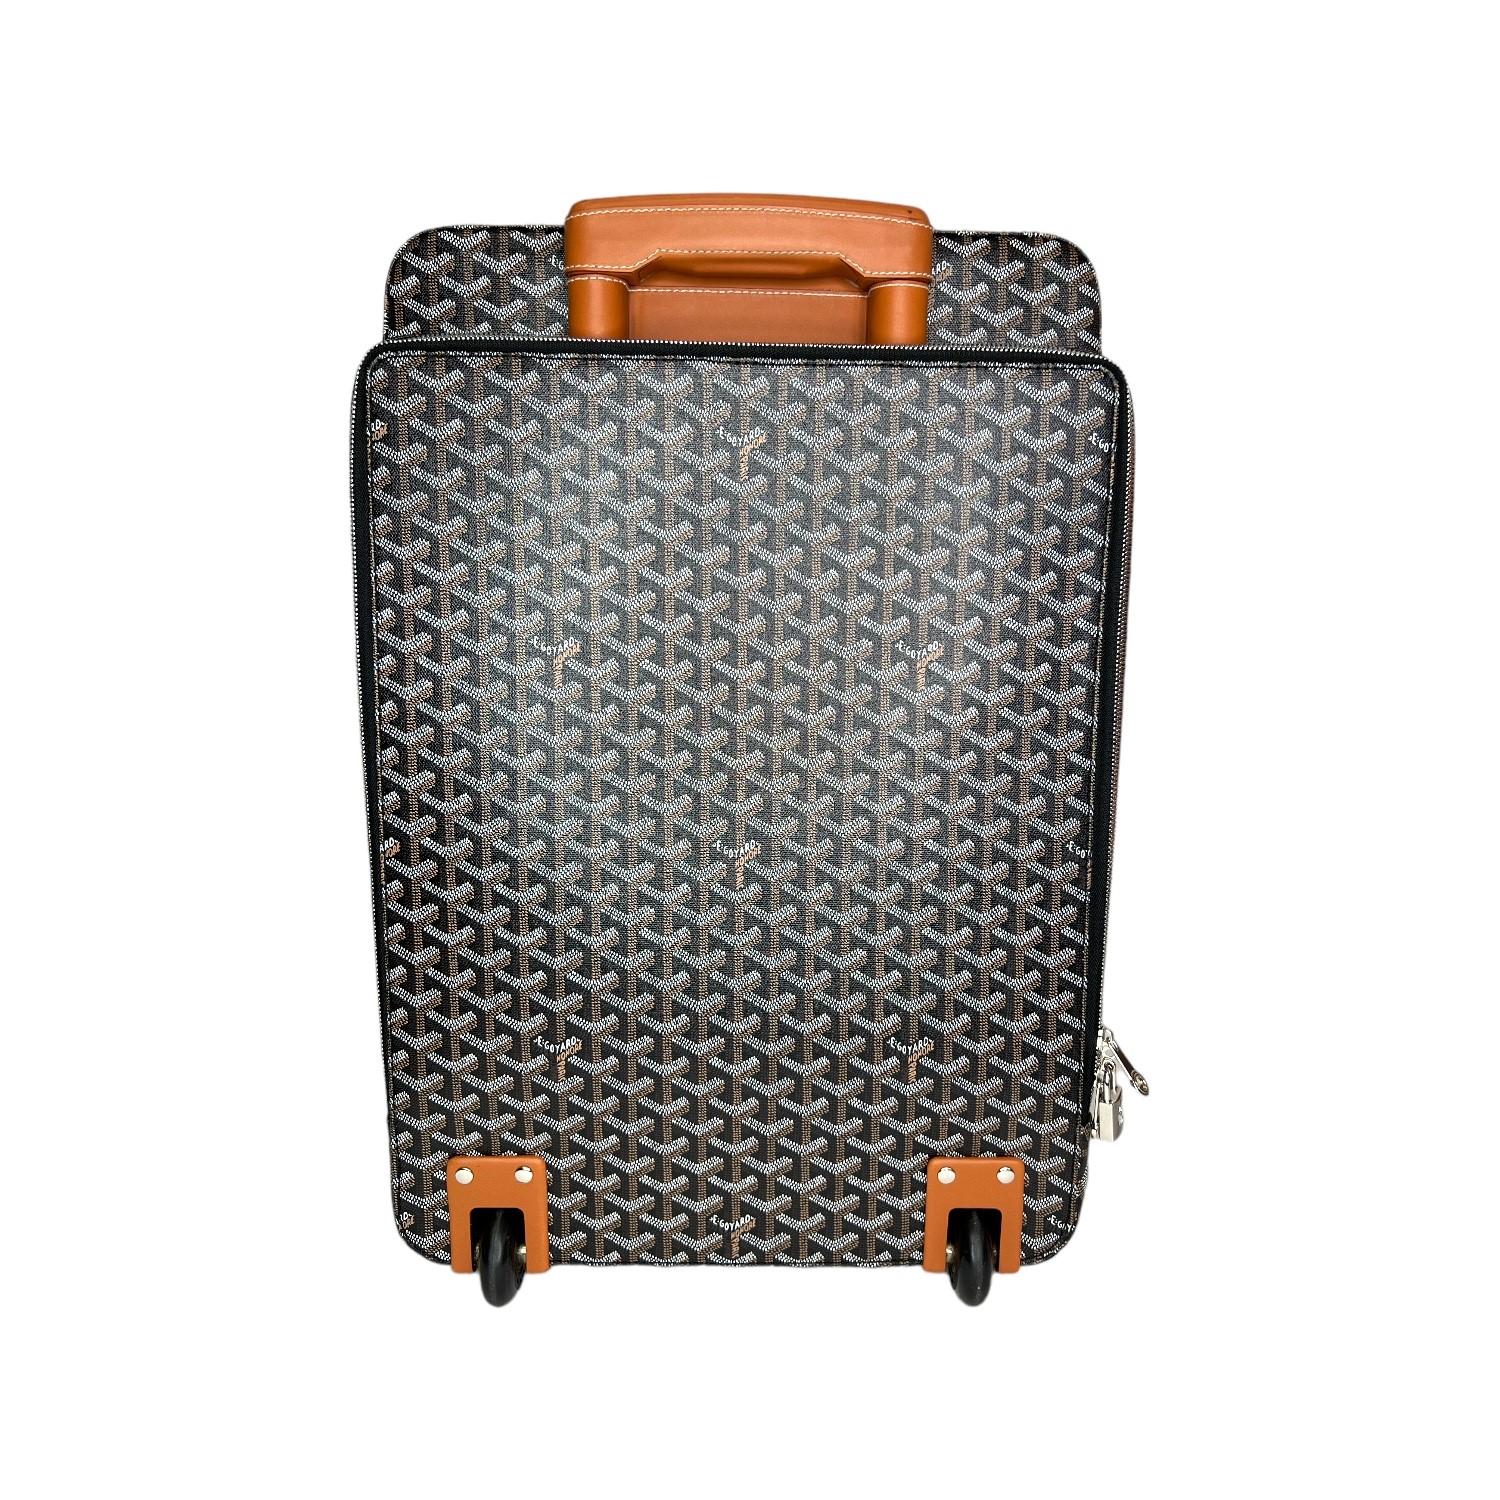 This Goyard Goyardine Trolley PM is finely crafted of the iconic Goyardine coated canvas exterior with leather trimming and palladium hardware features. It has 2 leather handles and there is also a retractable pull-handle. It has a zipped slip